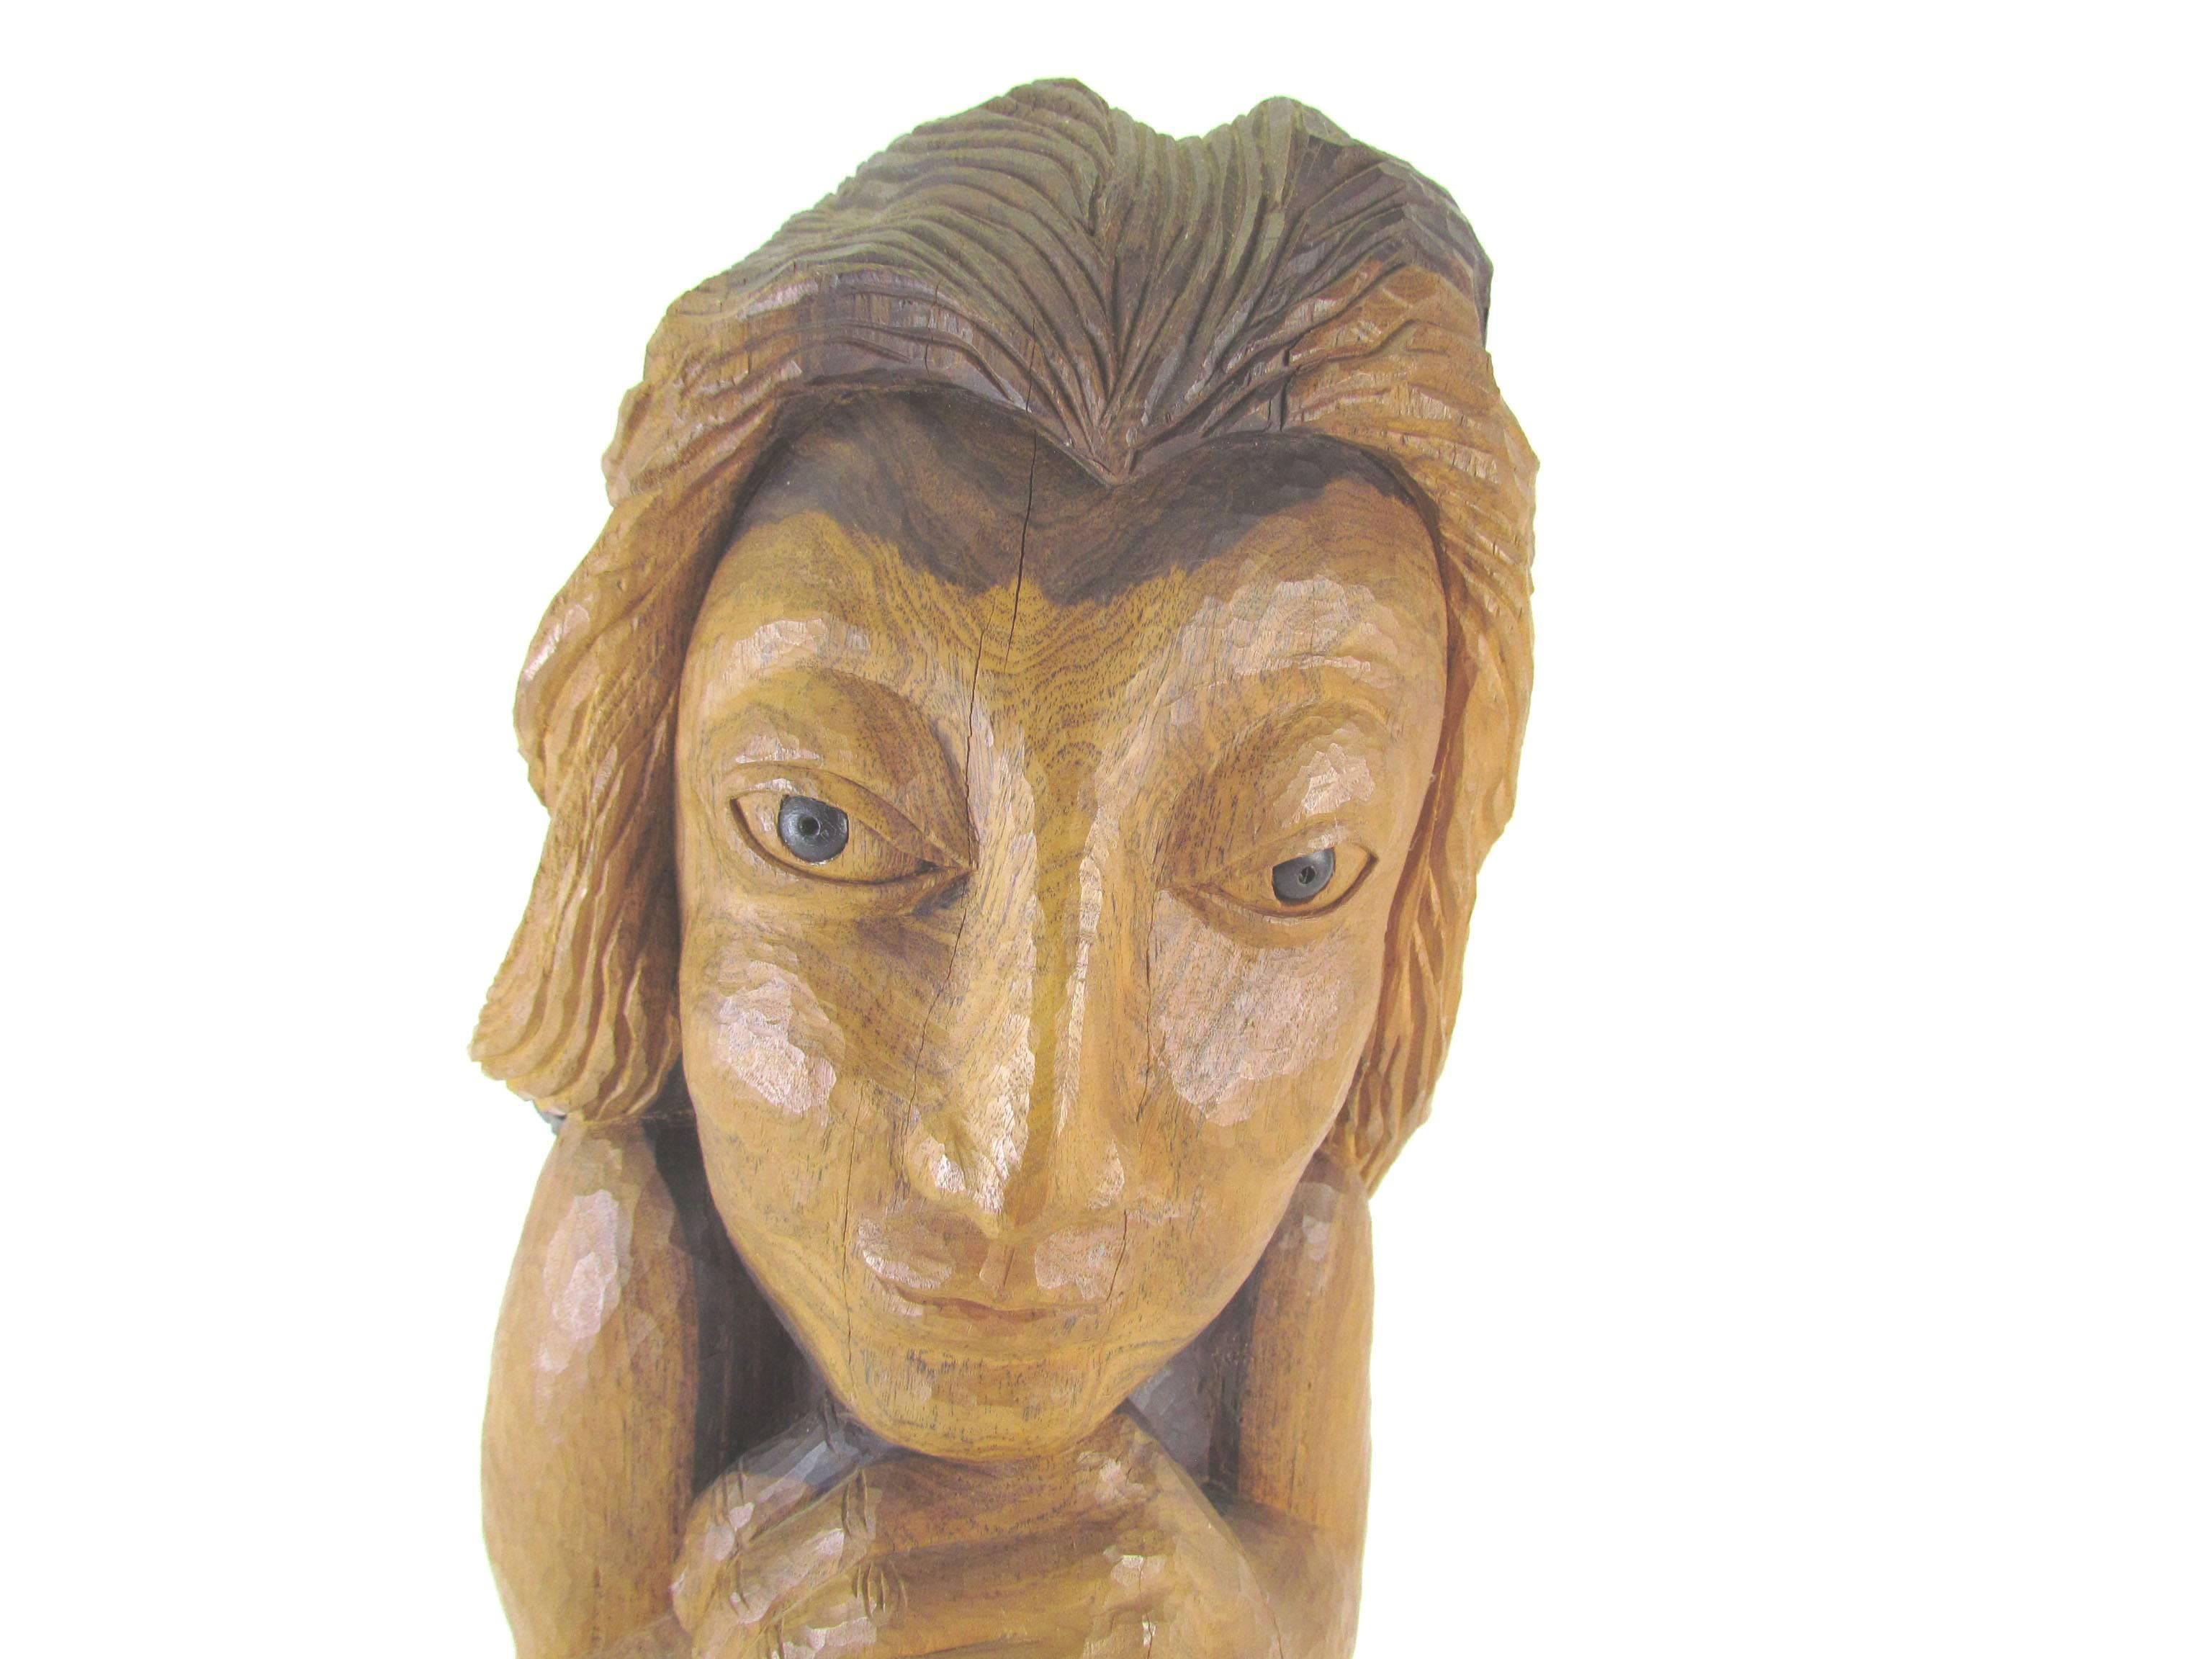 Carved wood sculpture of a female form titled “Miss Num' by Diane Derrick, circa 1973.

Diane Derrick is renowned for her allegorical sculptures of women and for her many years of activism in the gay and lesbian rights movement. She began